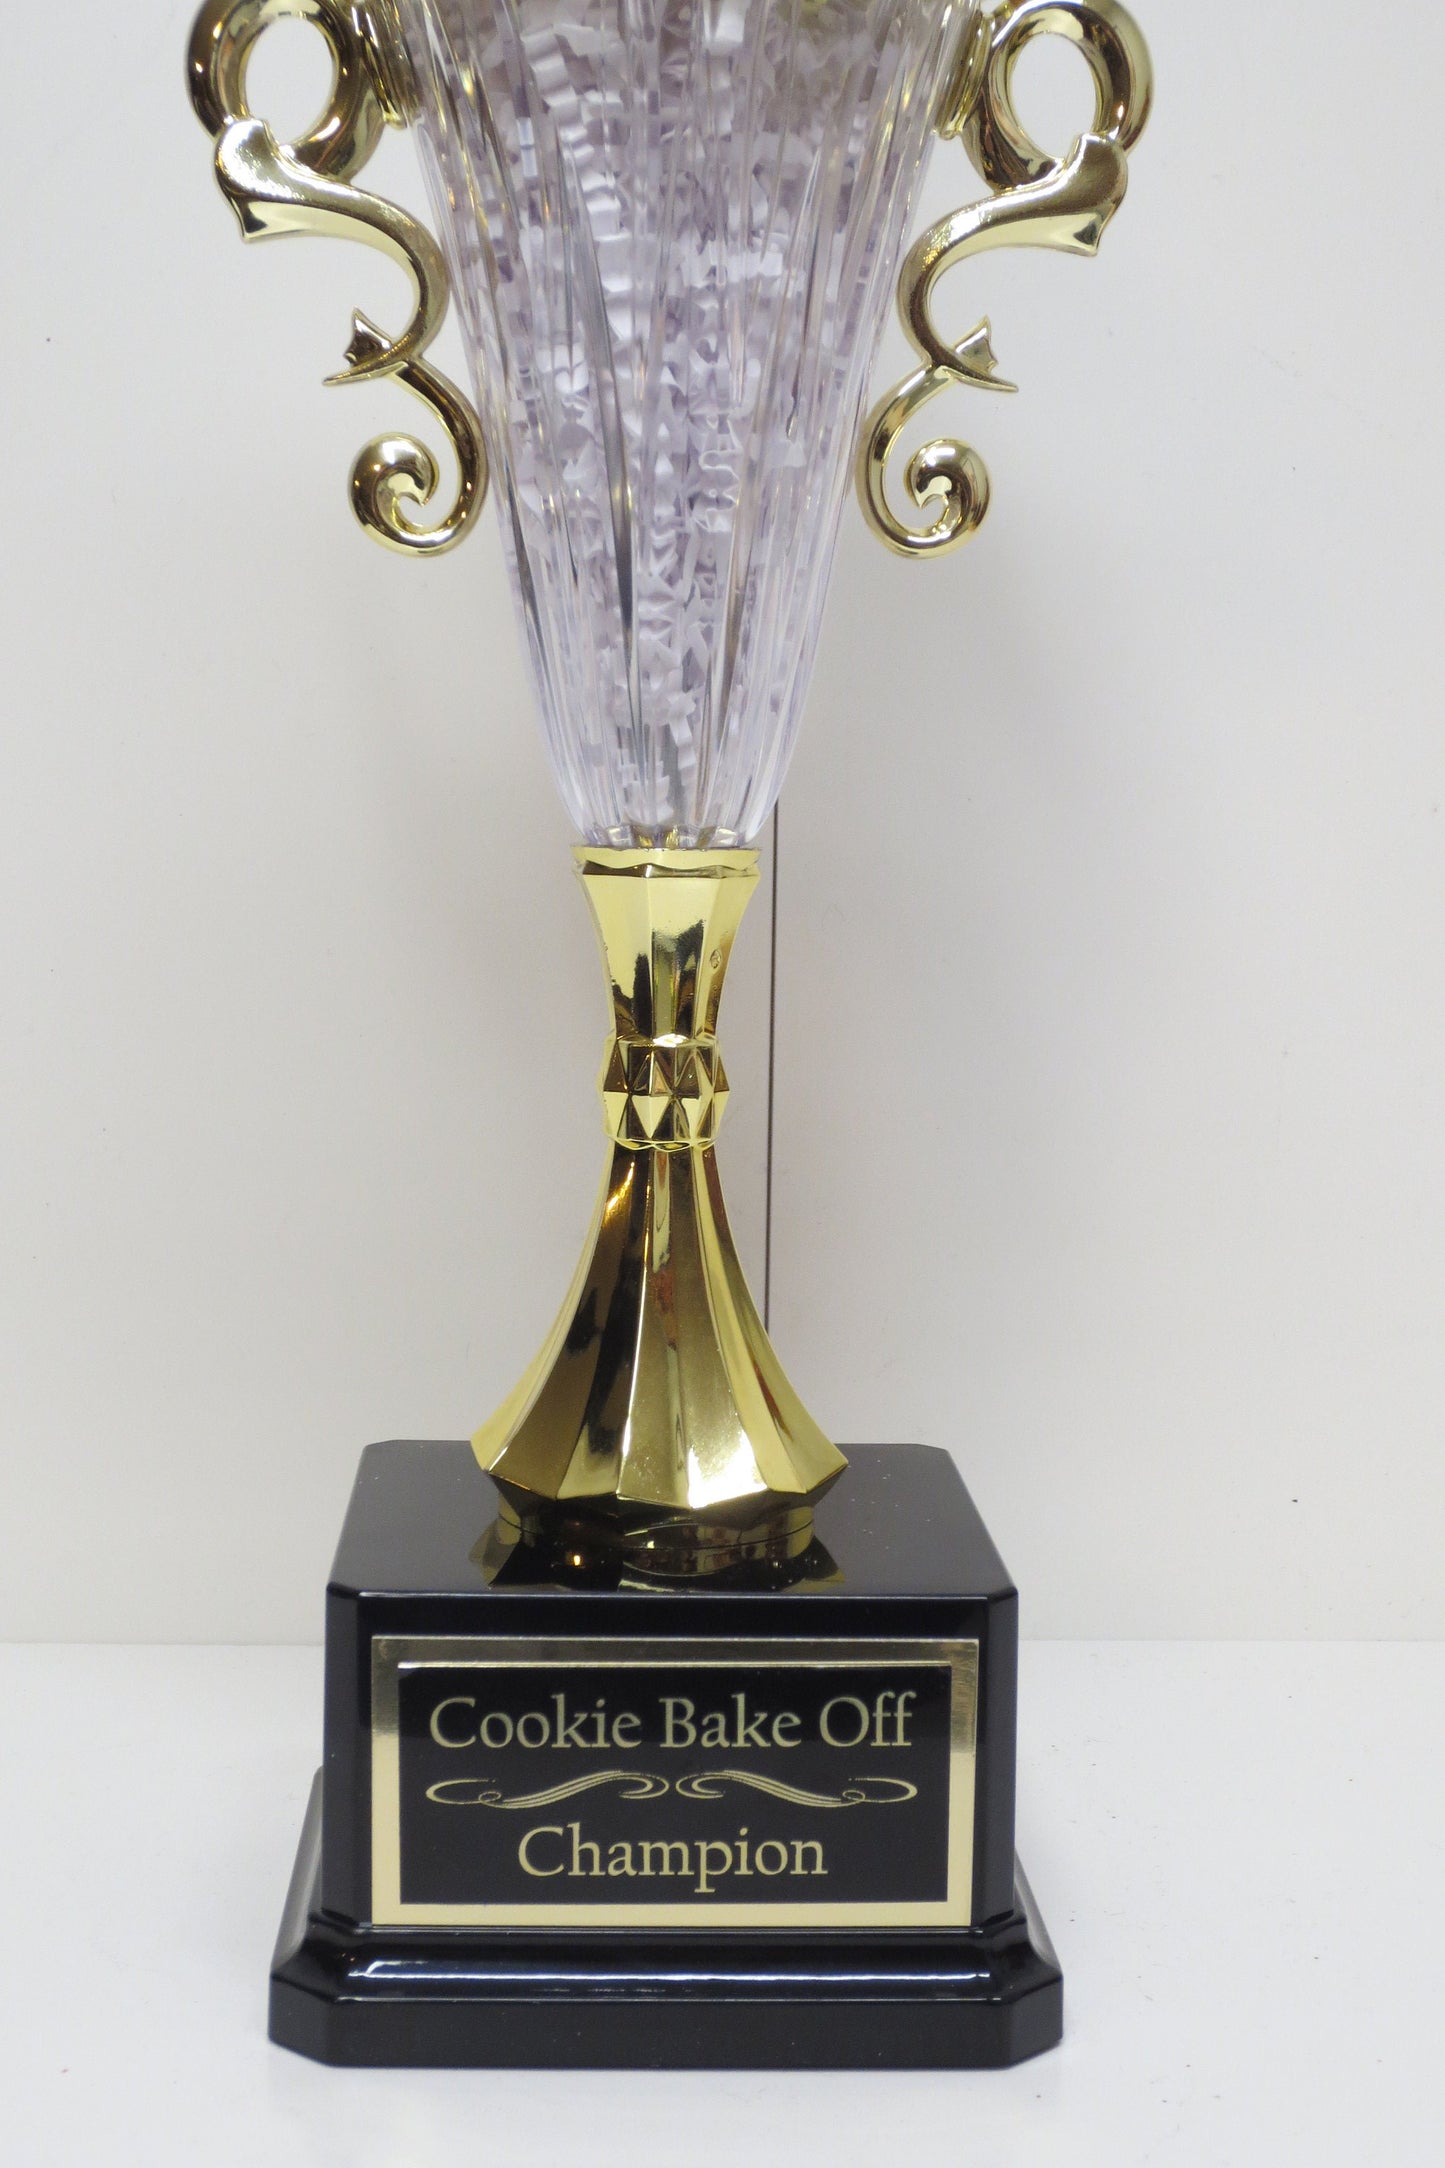 Cookie Bake Off Trophy Chocolate Chip Gingerbread House Ugliest Ugly Sweater Contest Family Trophy Winner Christmas Decor Holiday Decor